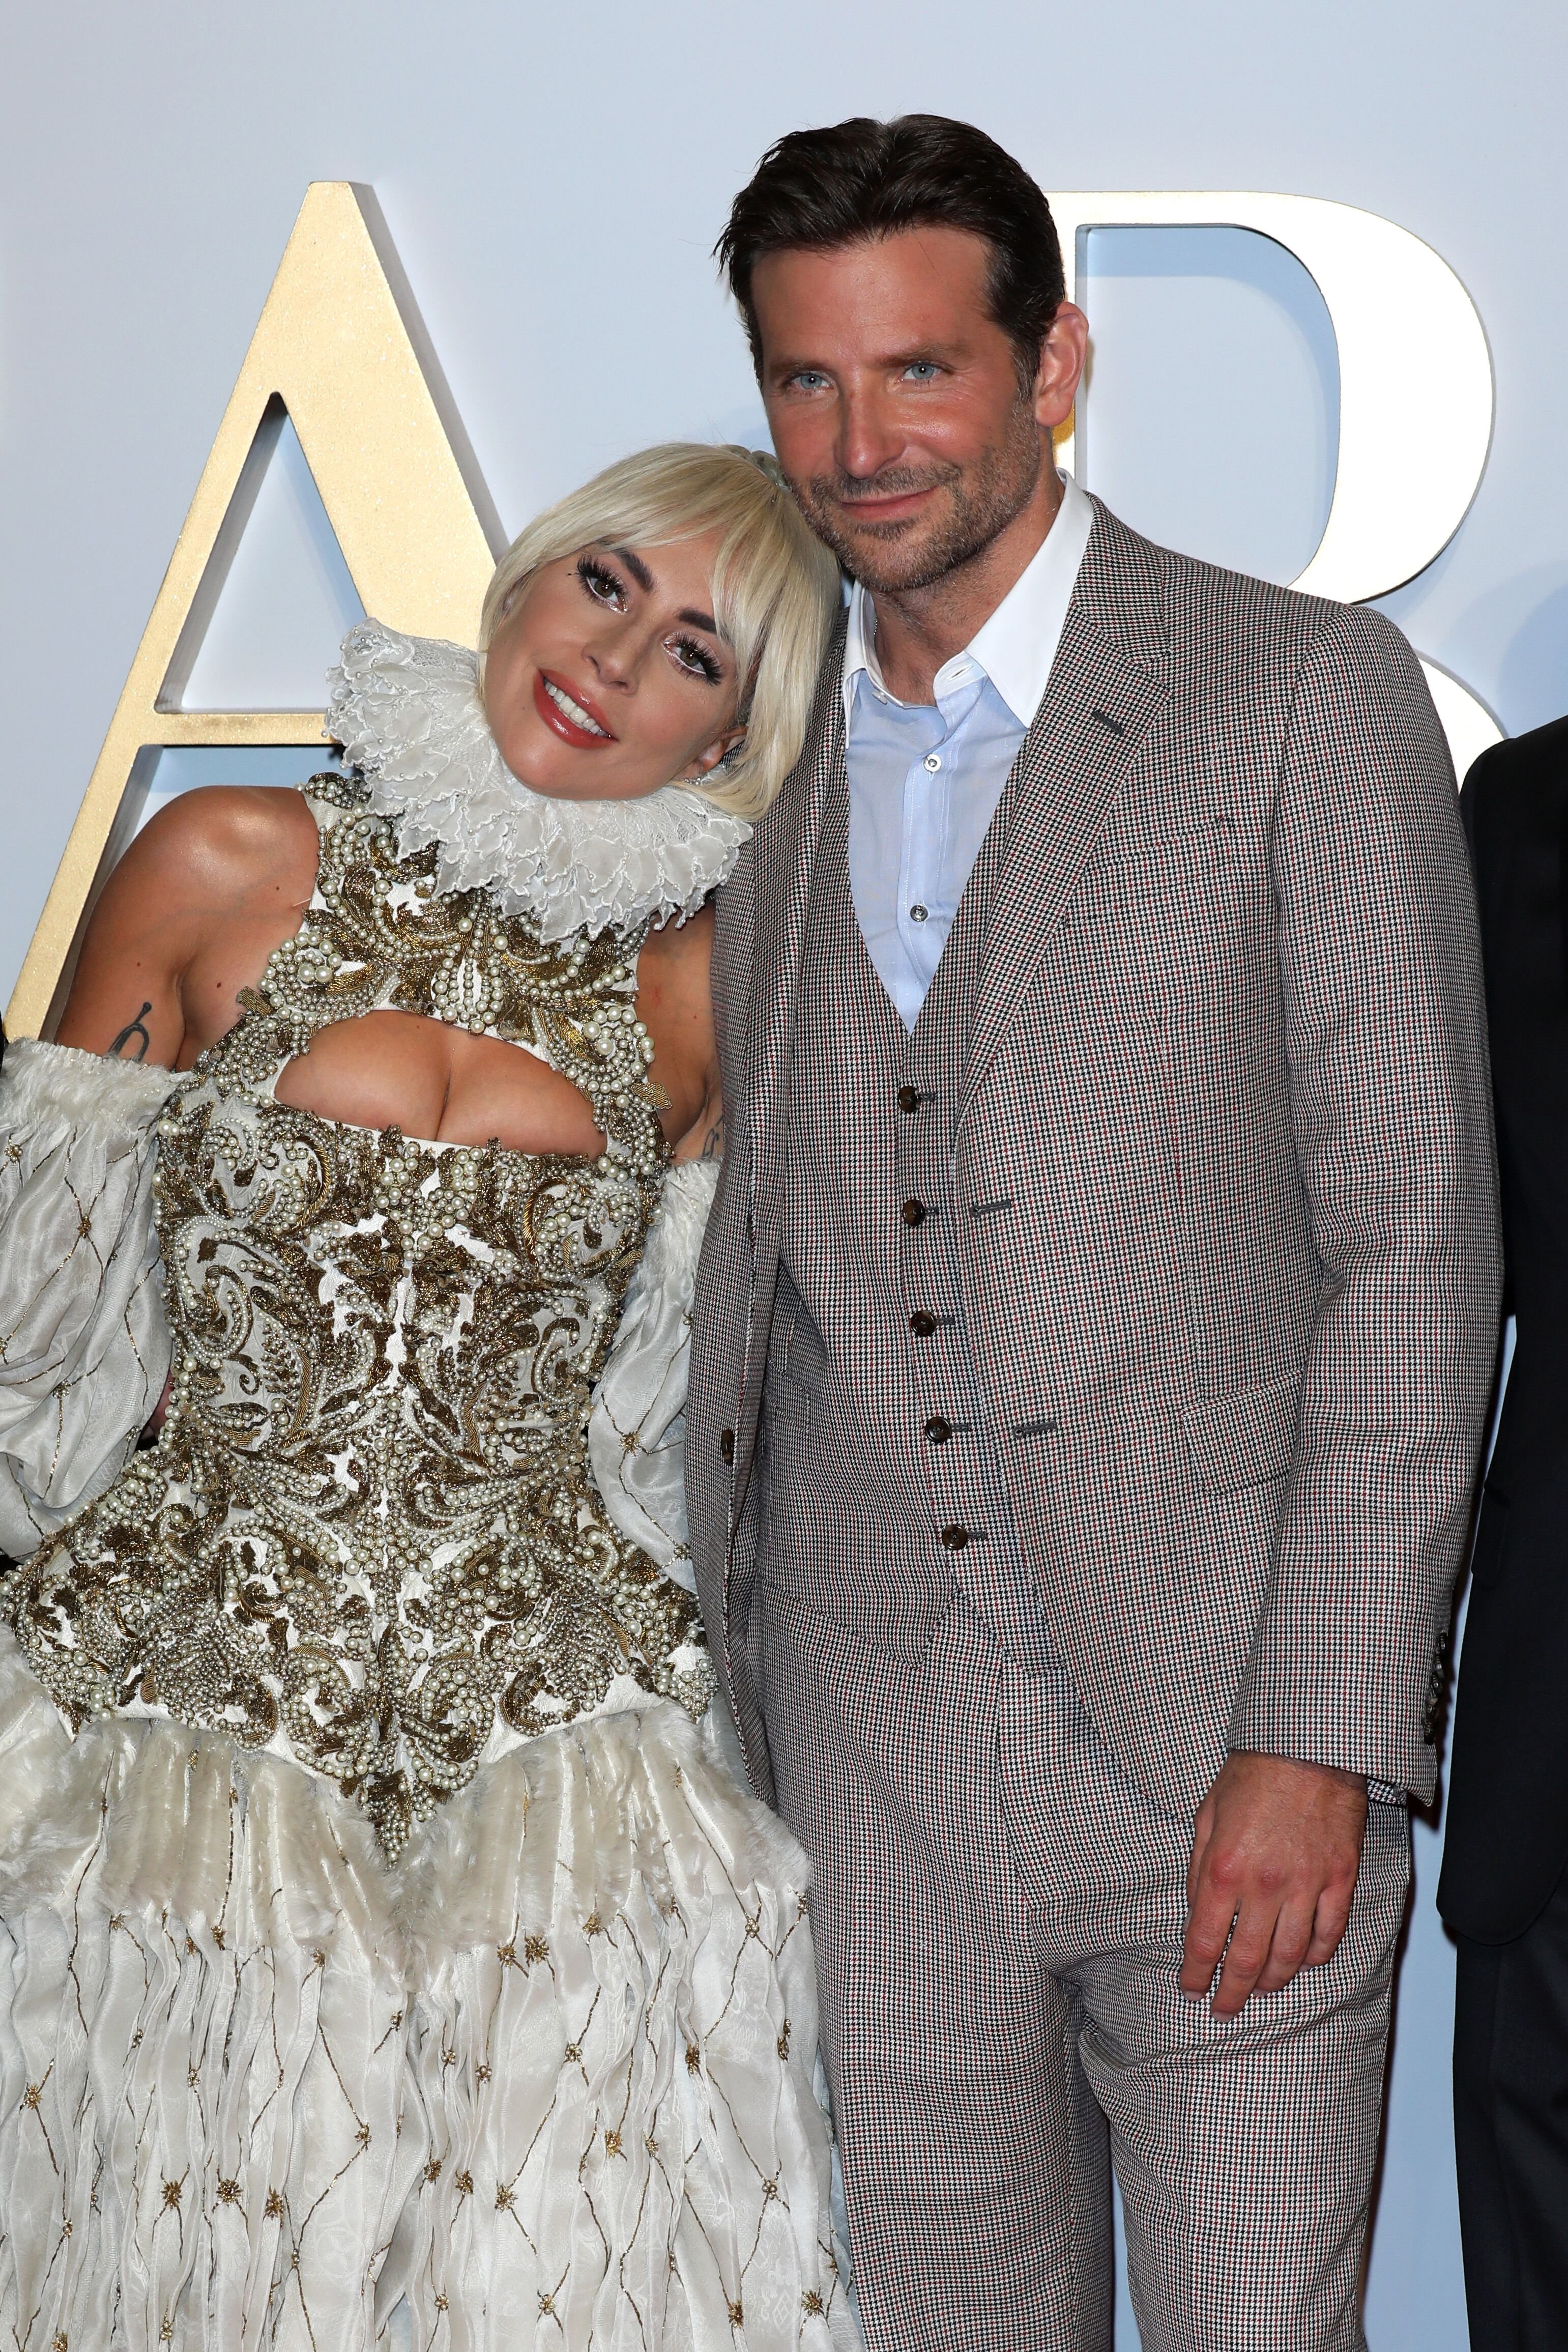 Lady Gaga and Bradley Cooper attend the UK premiere of 'A Star Is Born' held at Vue West End on September 27, 2018 in London, England | Photo: Getty Images